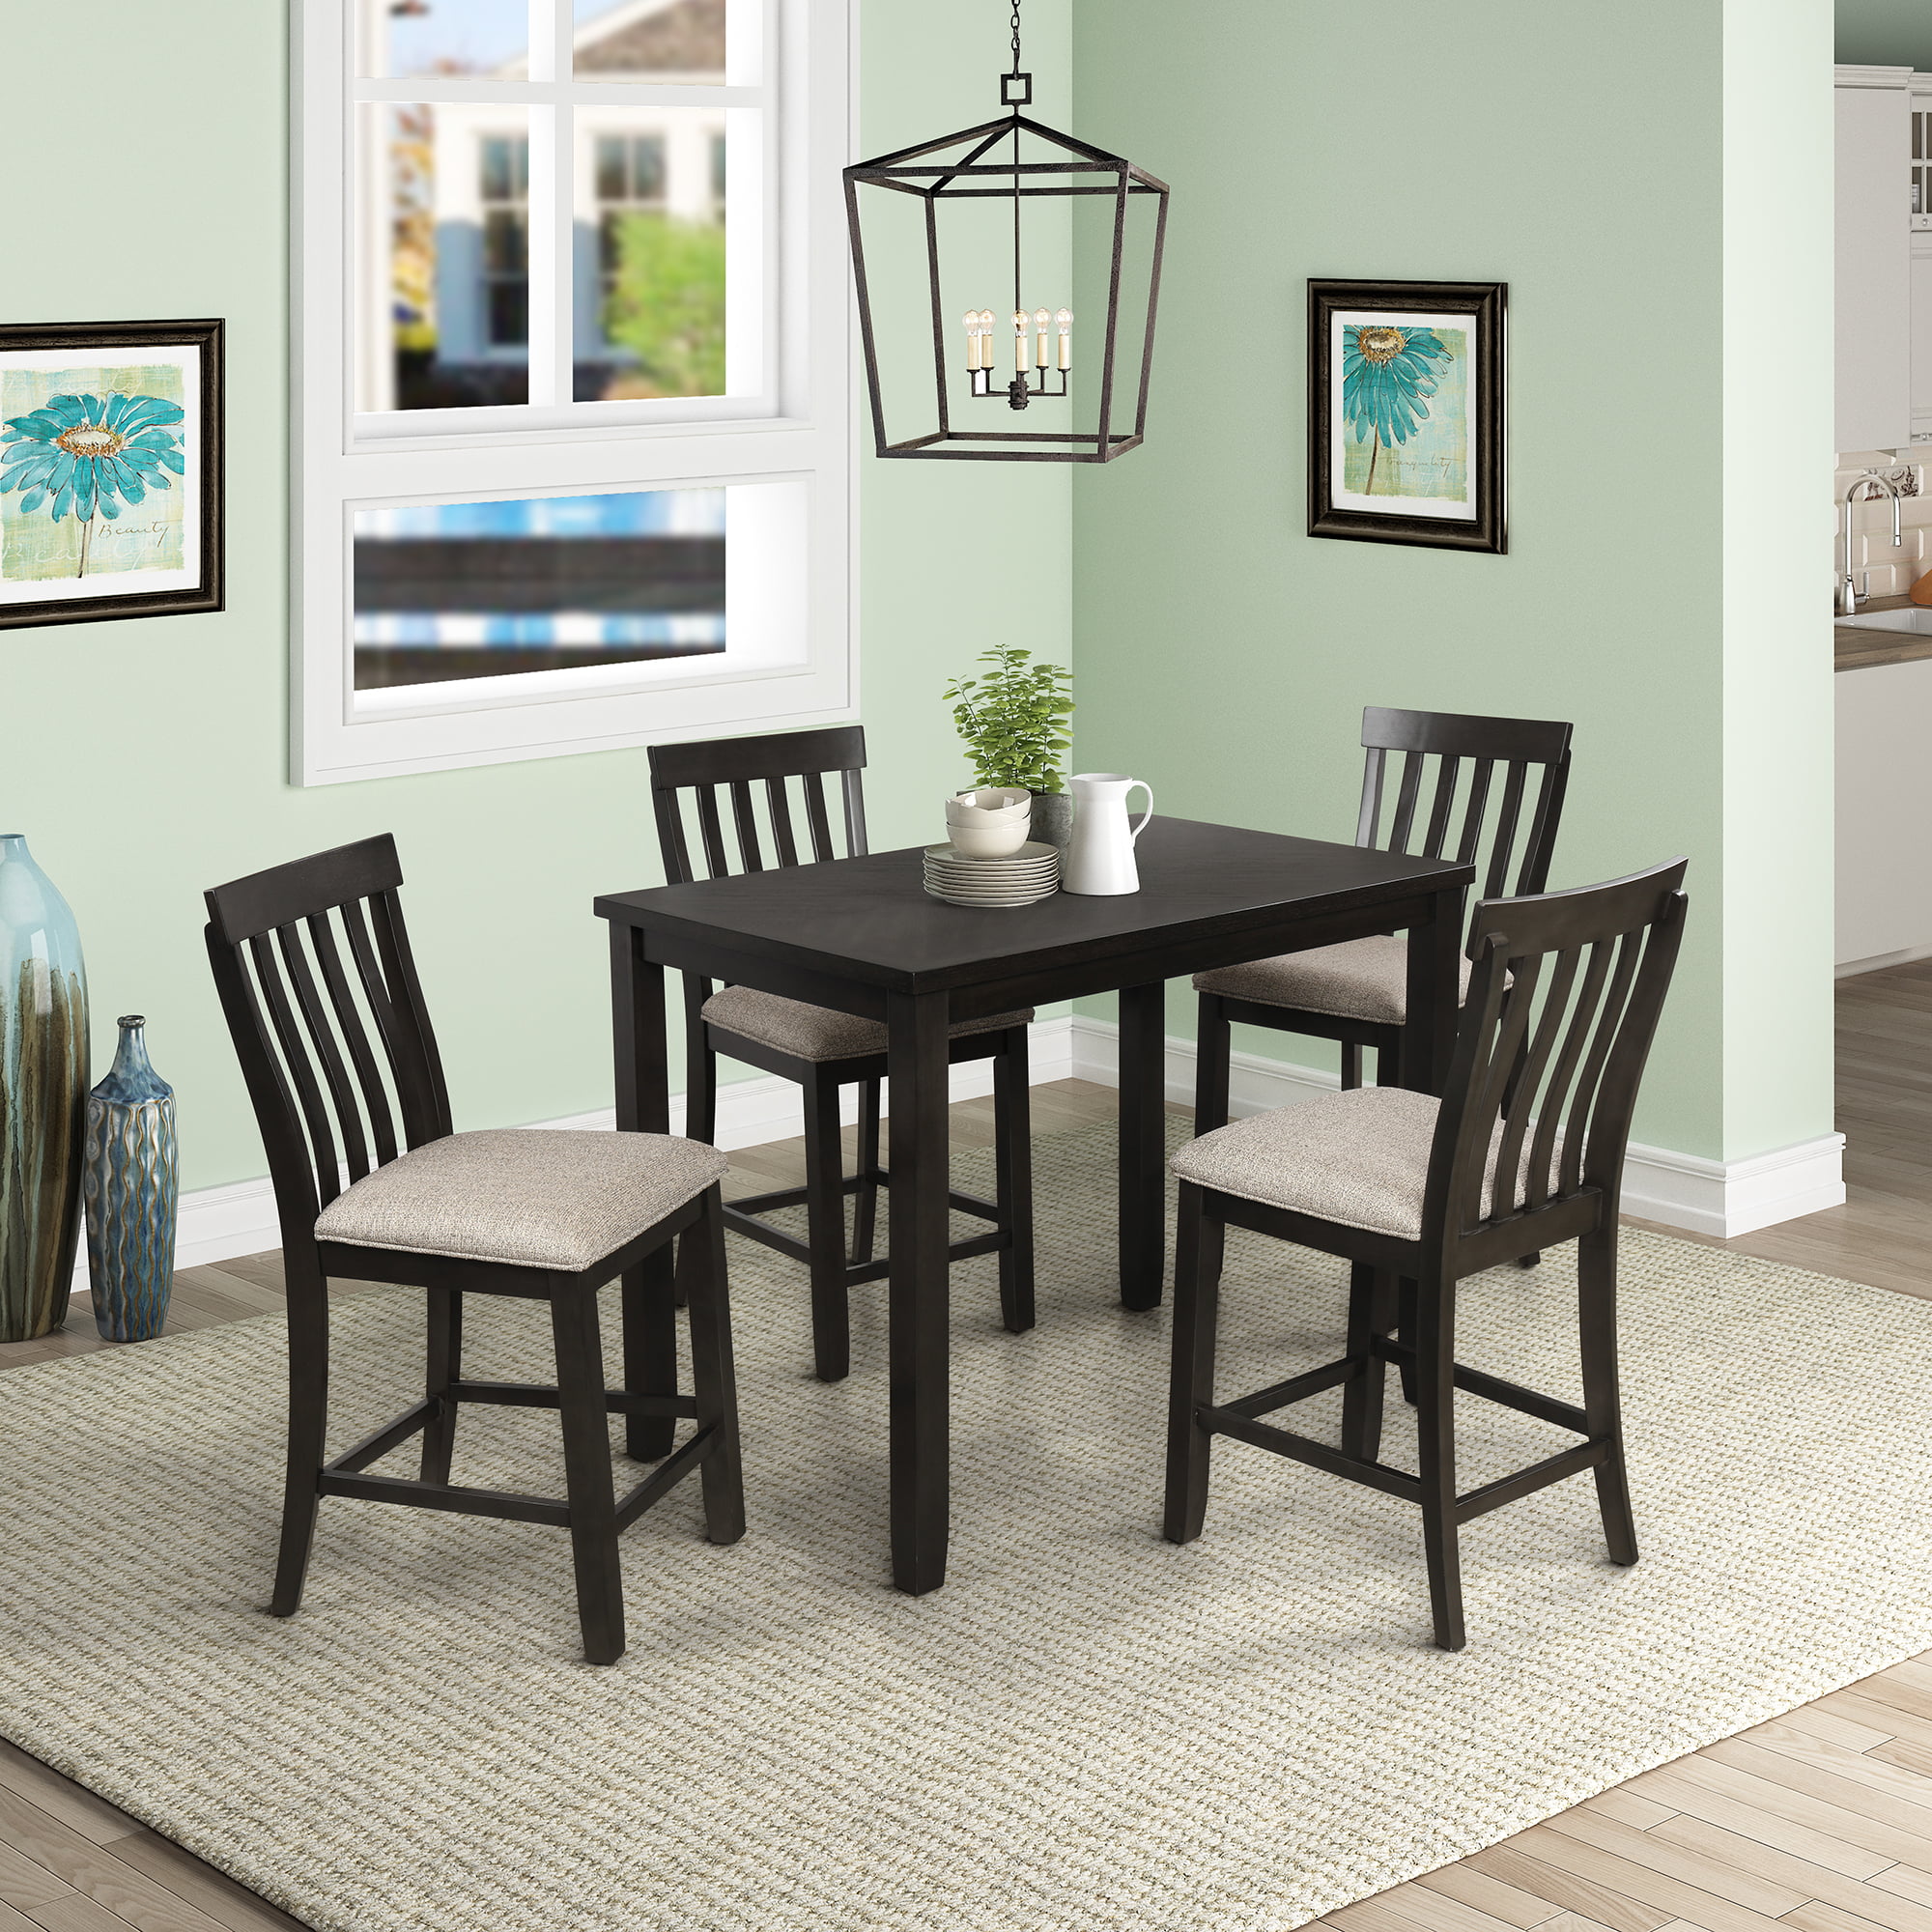 Clearance Kitchen Tables - Image to u